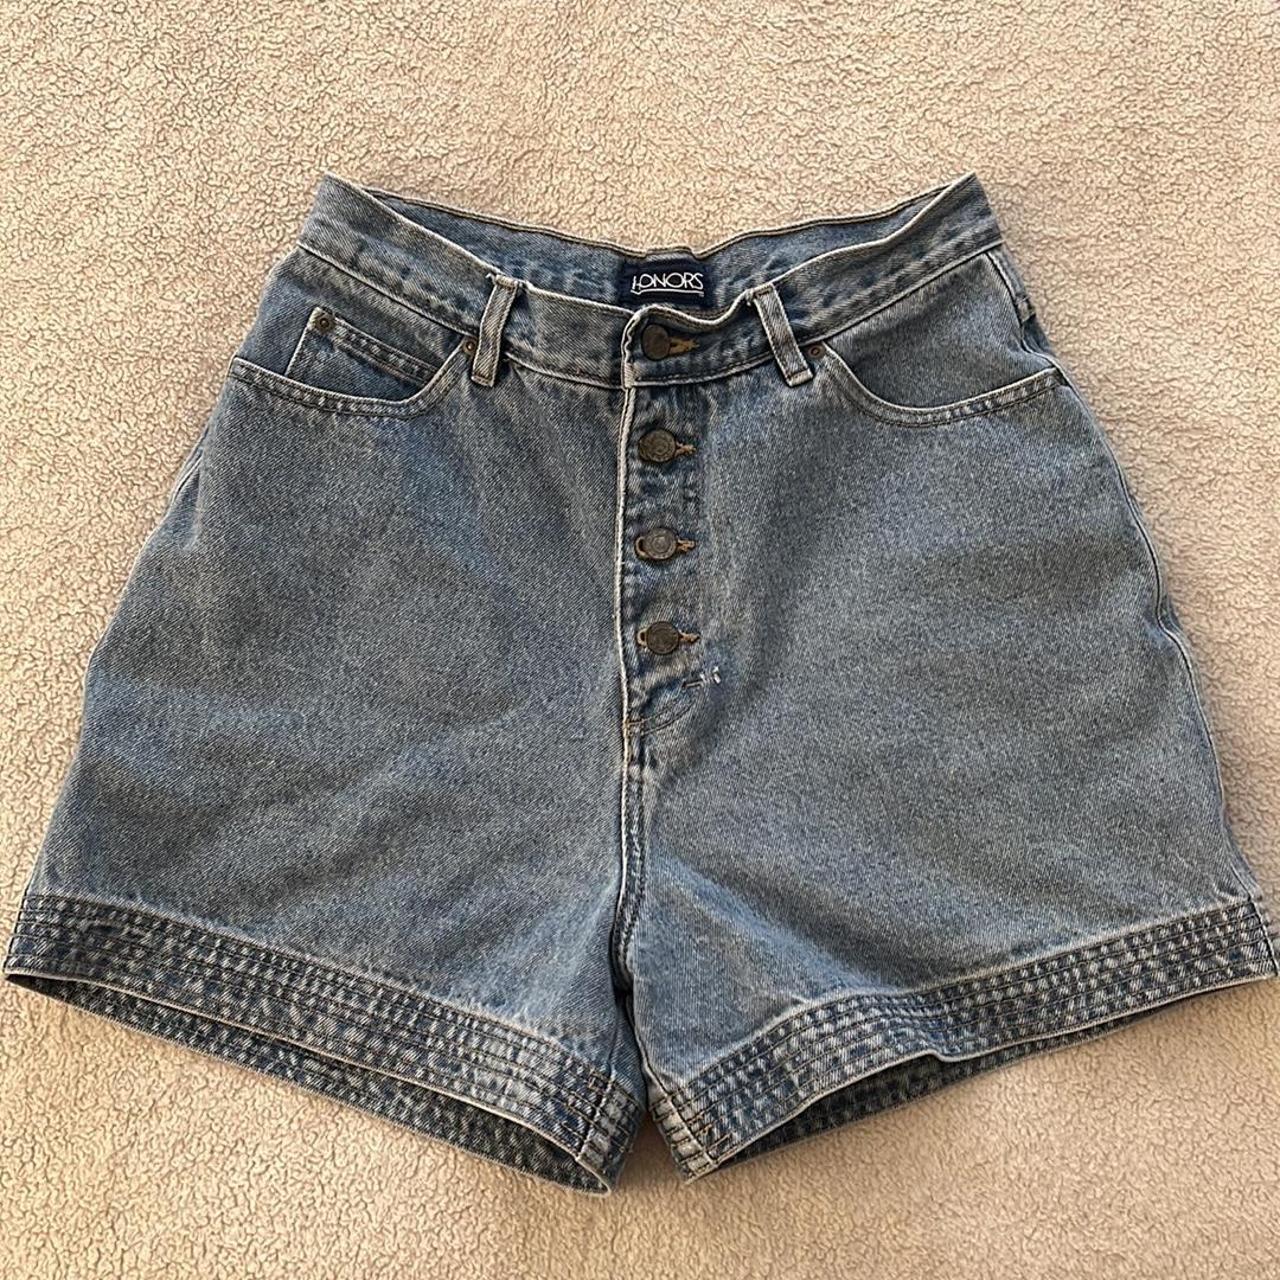 Get the Perfect Summer Look with BLANKNYC Boyfriend Distressed Jean Shorts